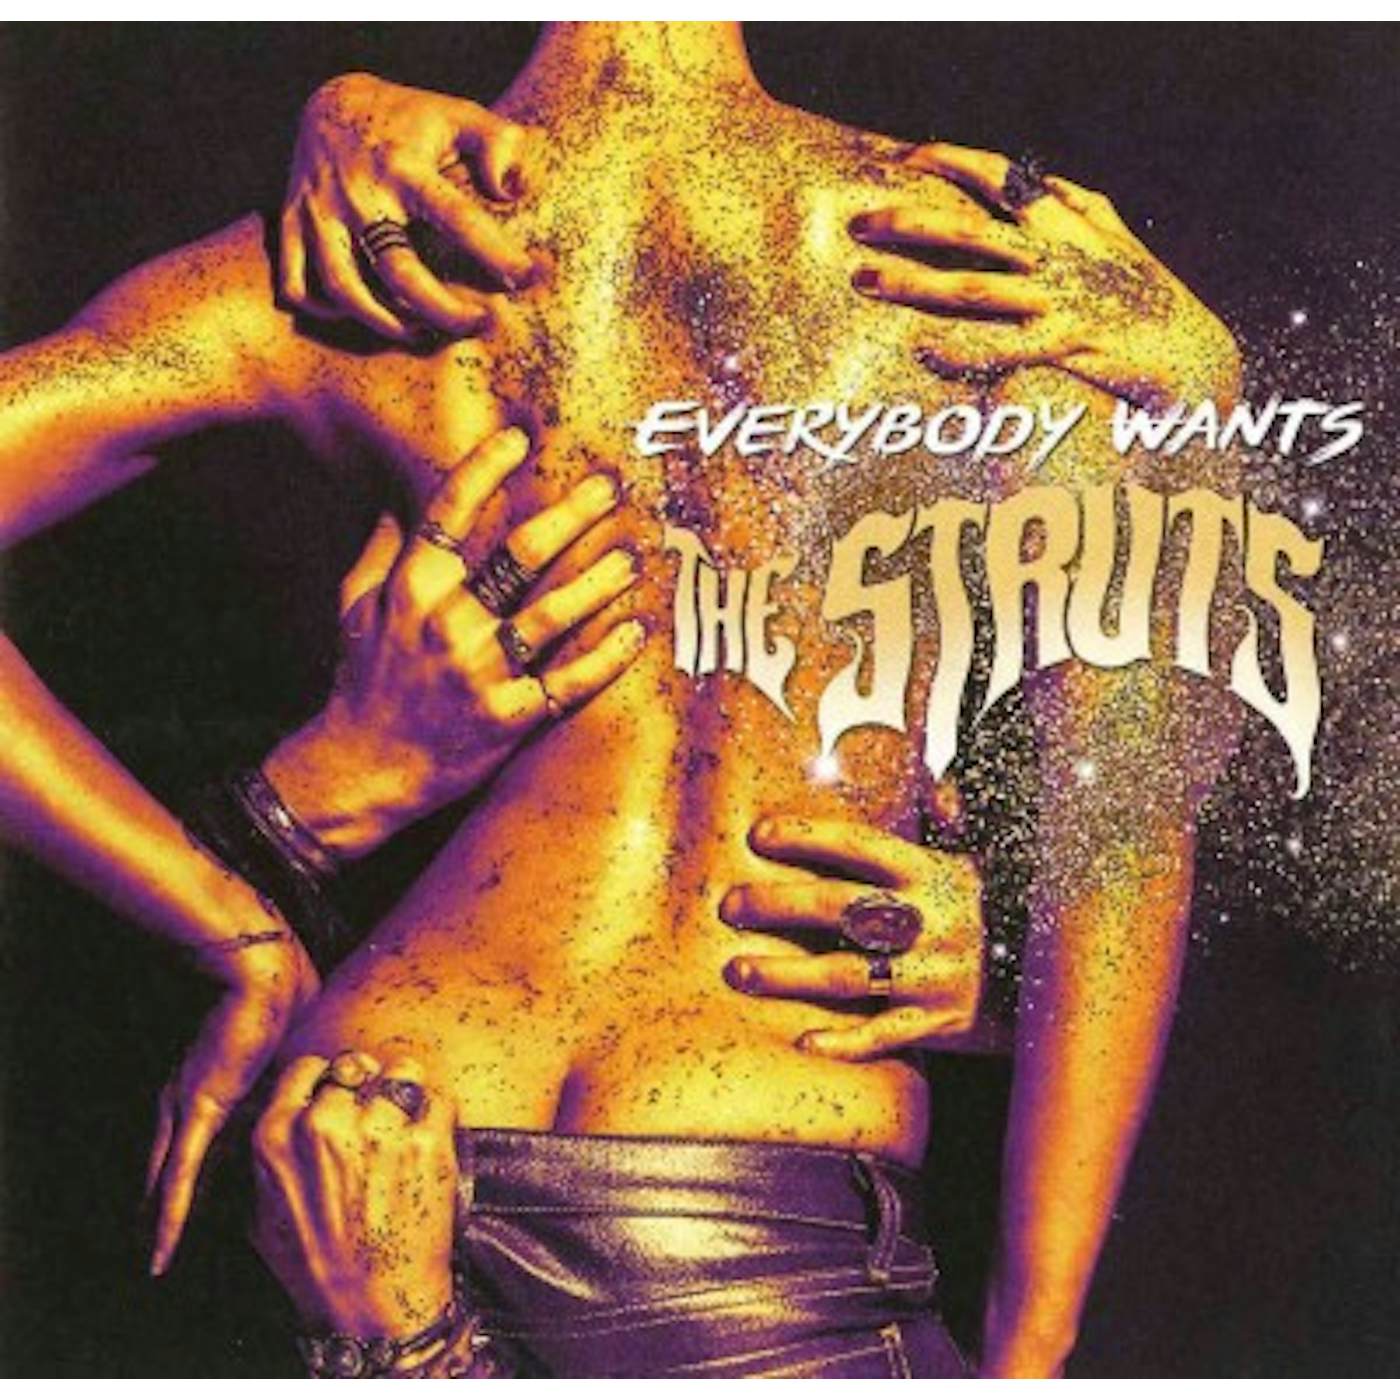 The Struts EVERYBODY WANTS CD